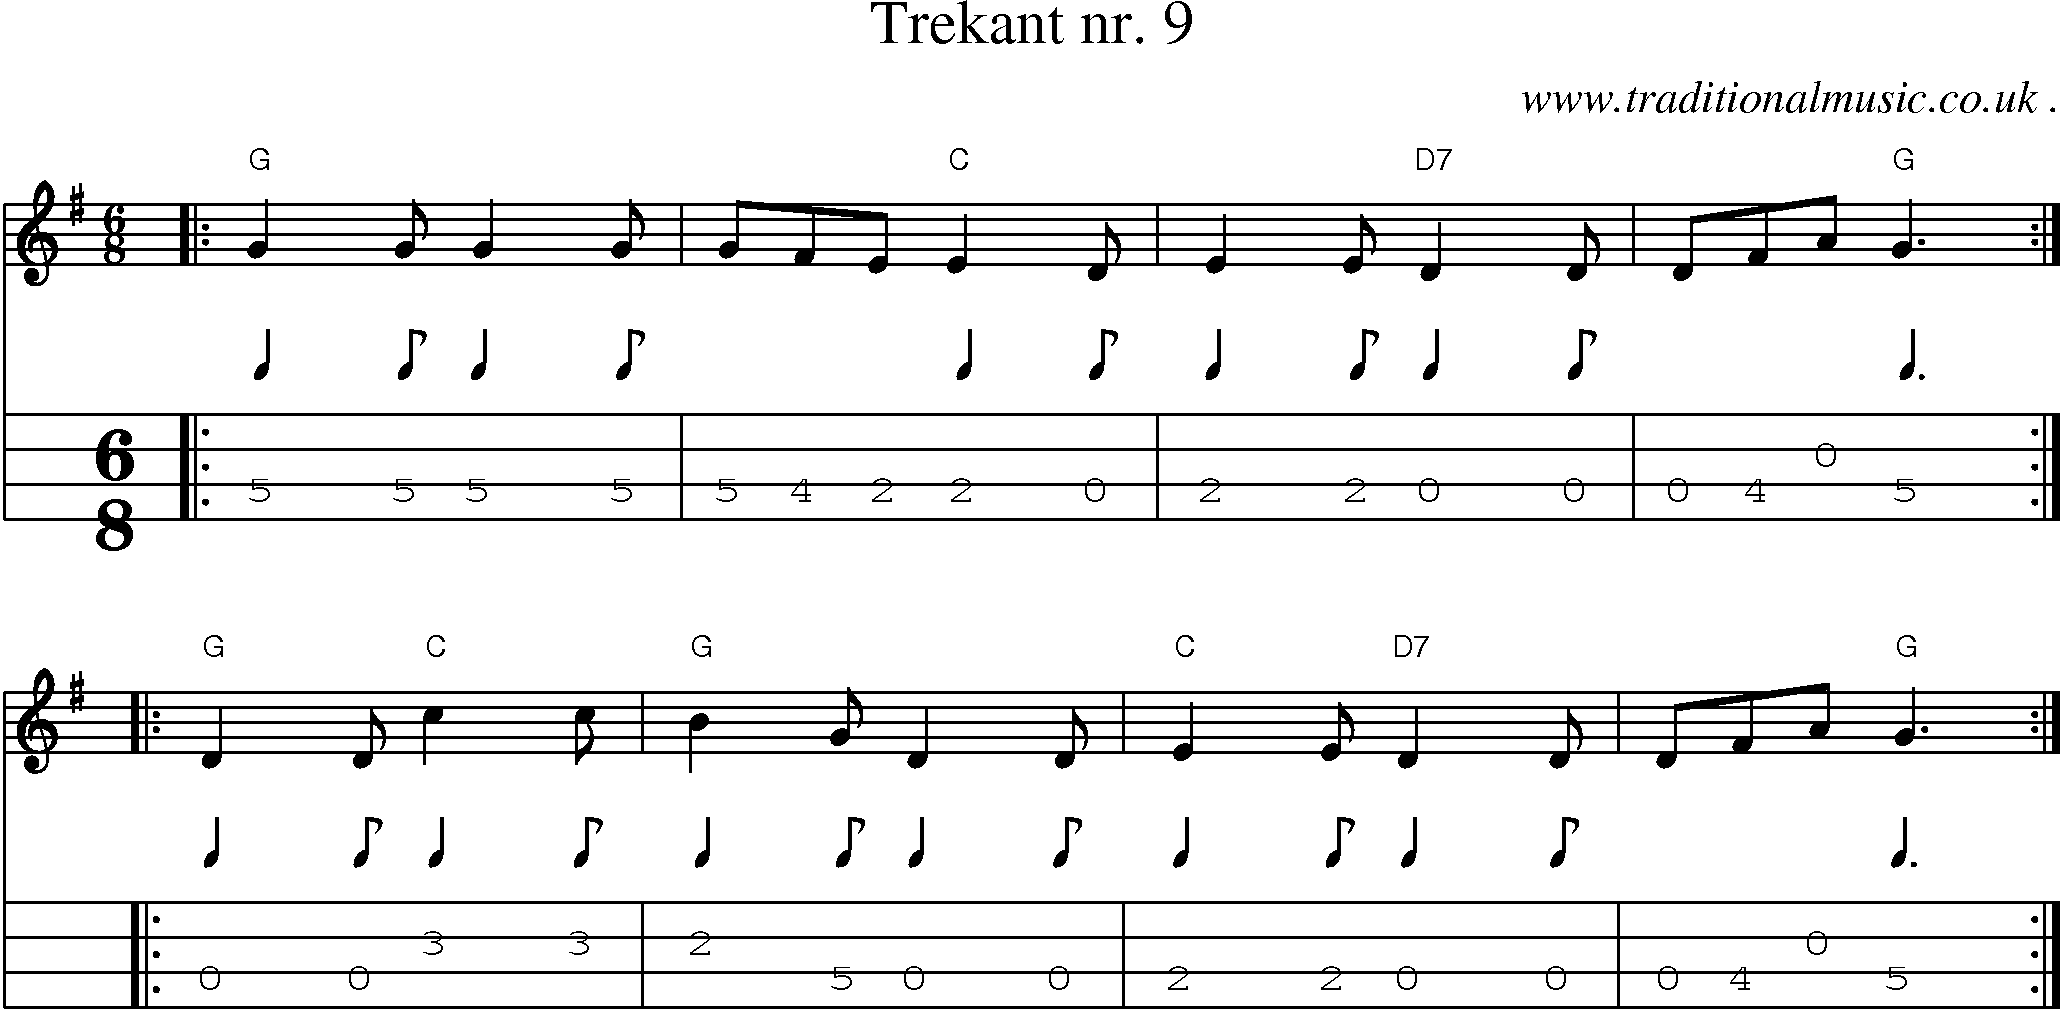 Sheet-music  score, Chords and Mandolin Tabs for Trekant Nr 9